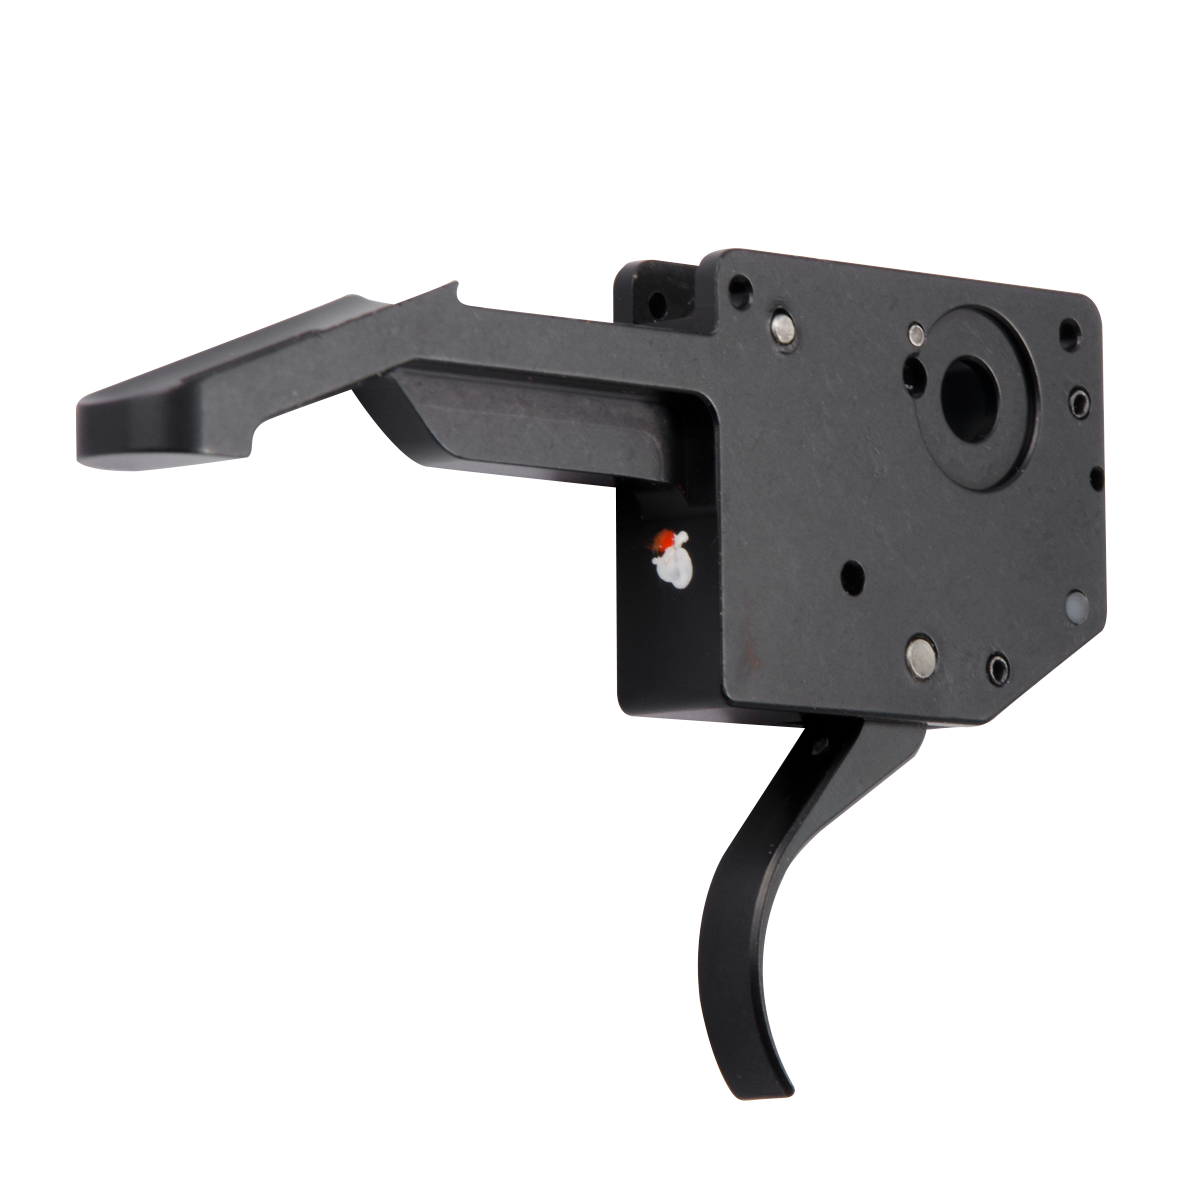 Replacement Trigger for the RUGER AMERICAN® CENTERFIRE